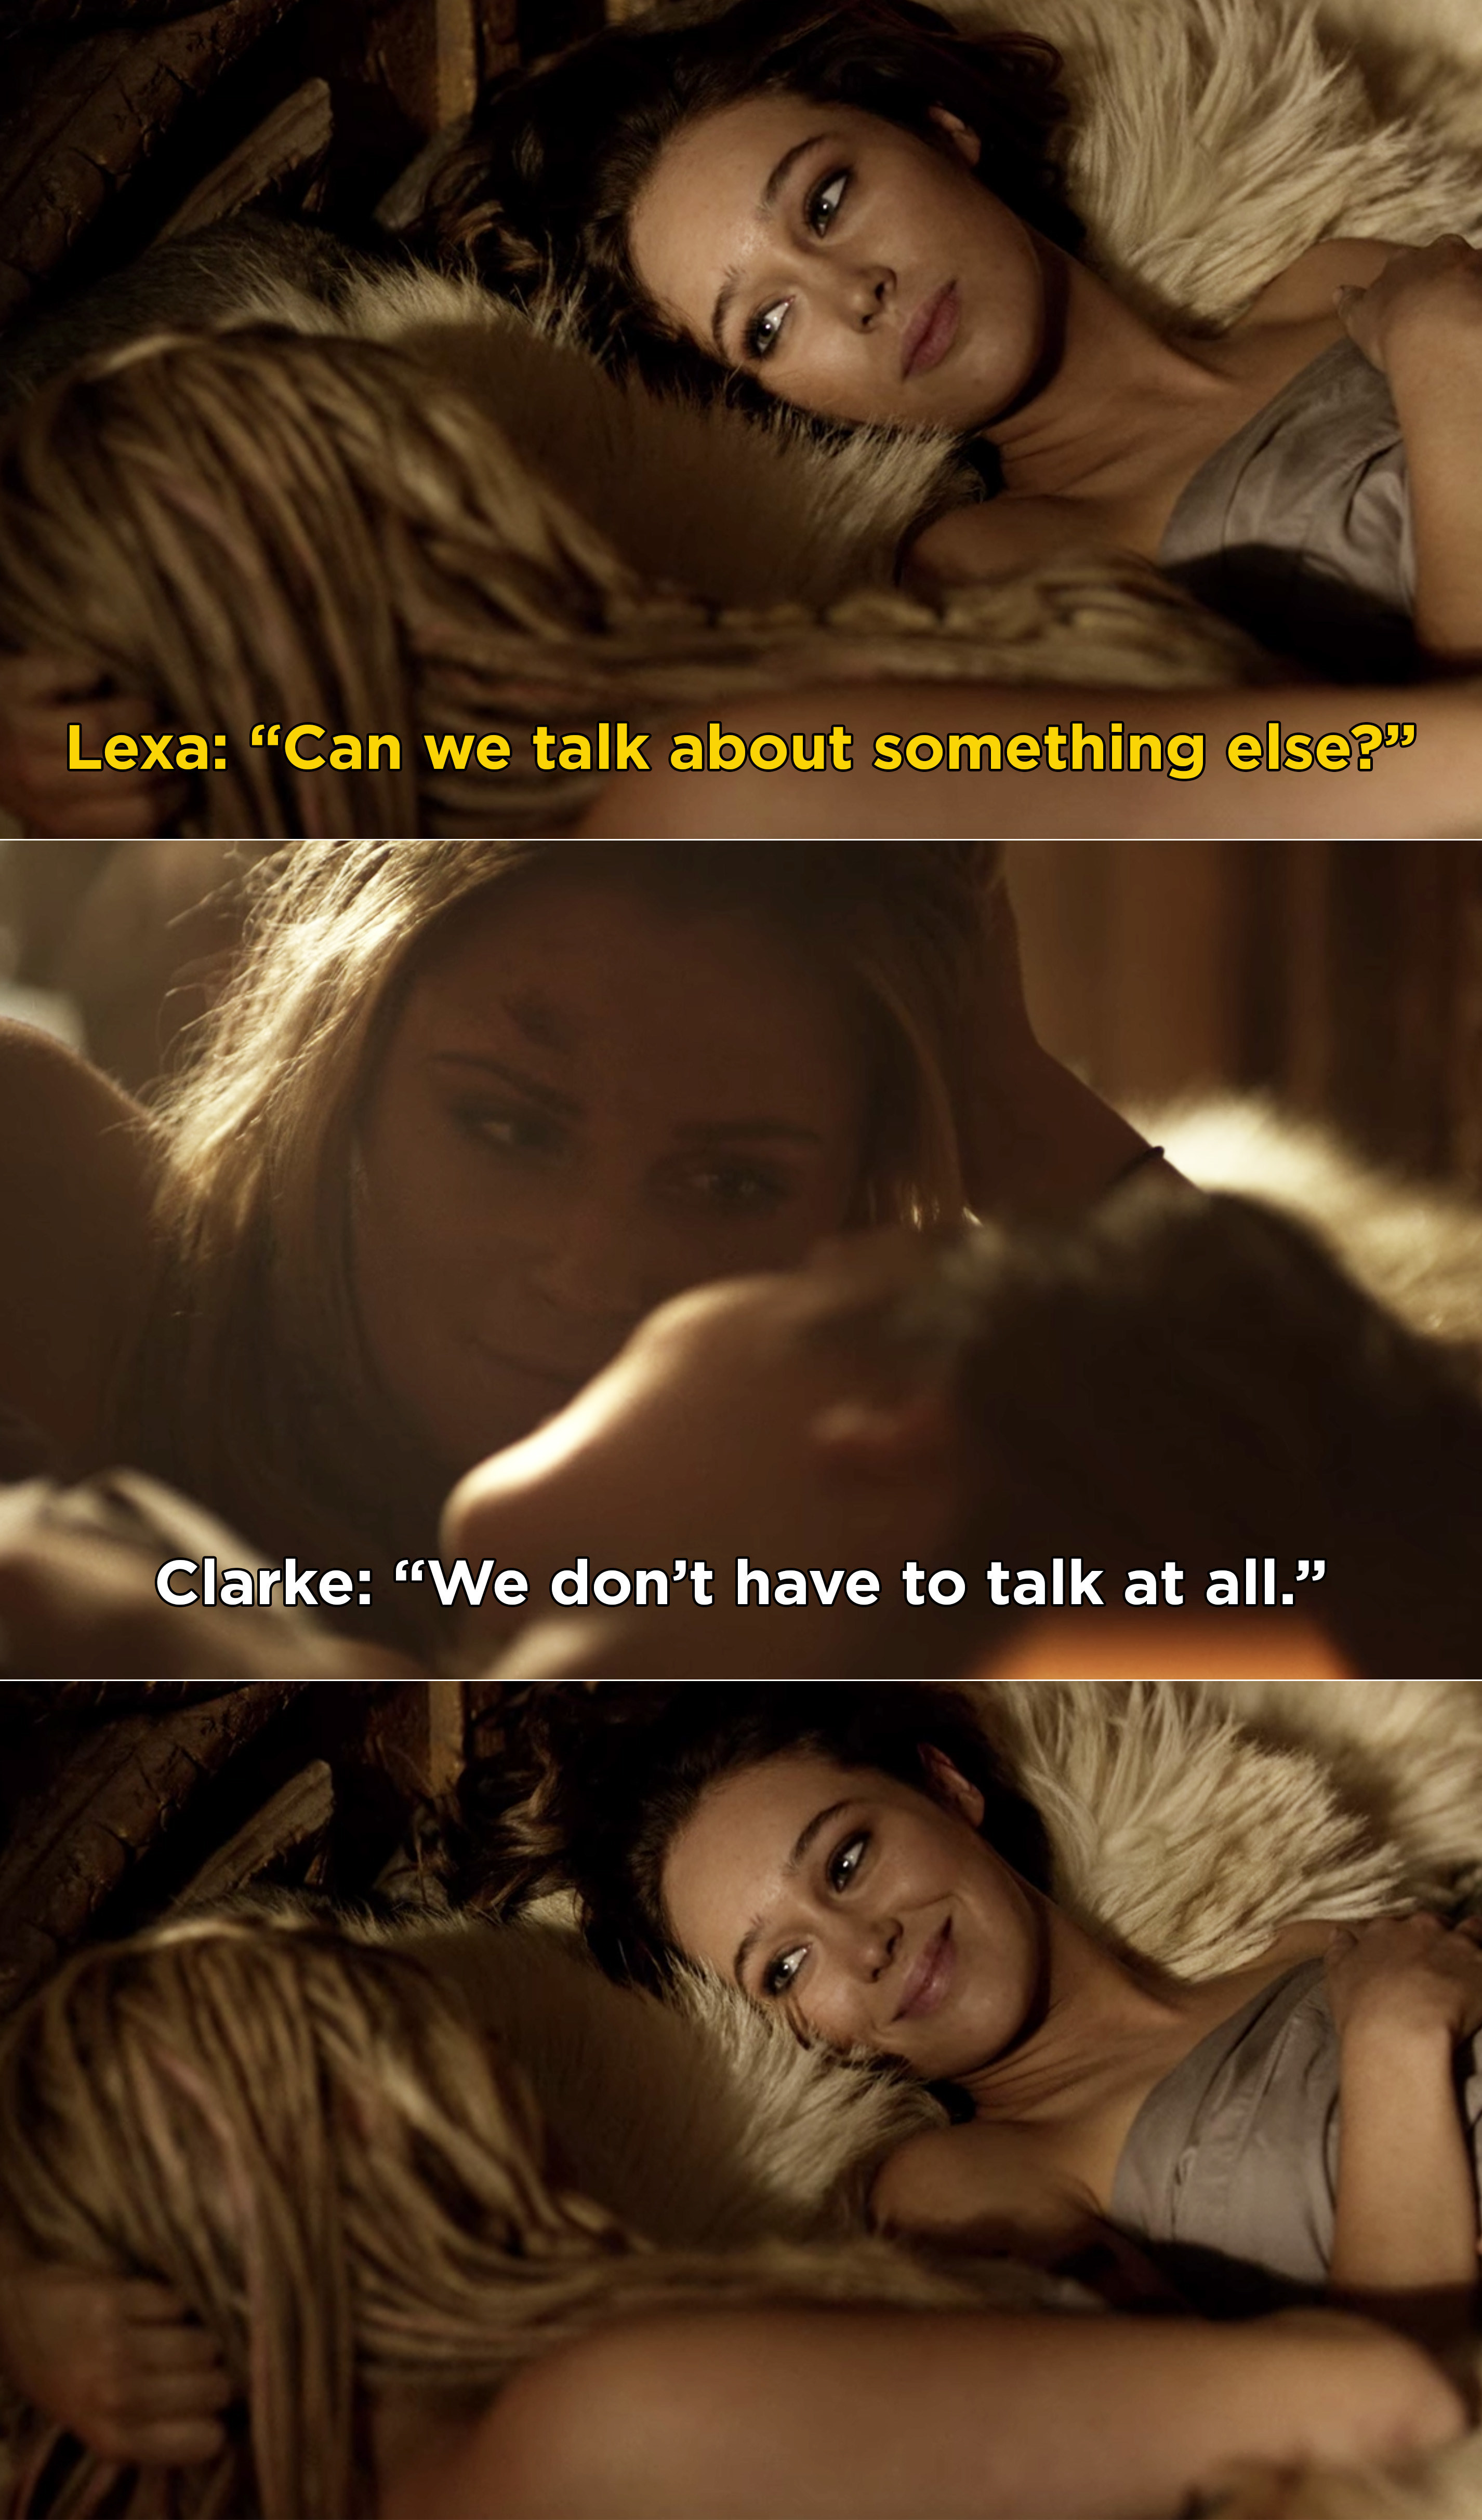 Lying in bed together, Lexa asks if they can talk about something else, and Clarke says they don&#x27;t have to talk about anything at all